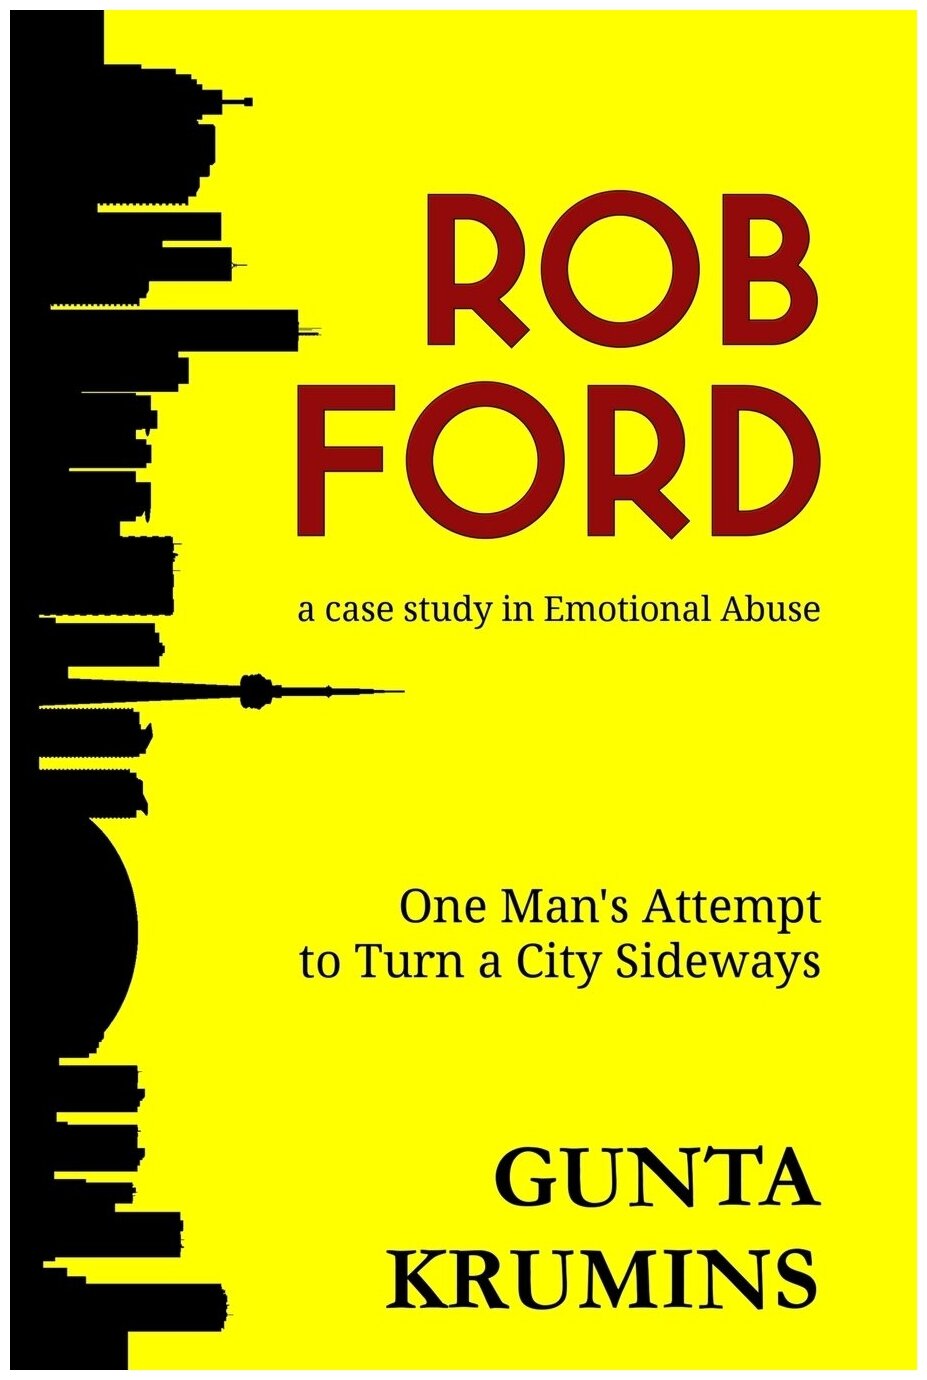 Rob Ford. A Case Study in Emotional Abuse: One Man's Attempt to Turn a City Sideways